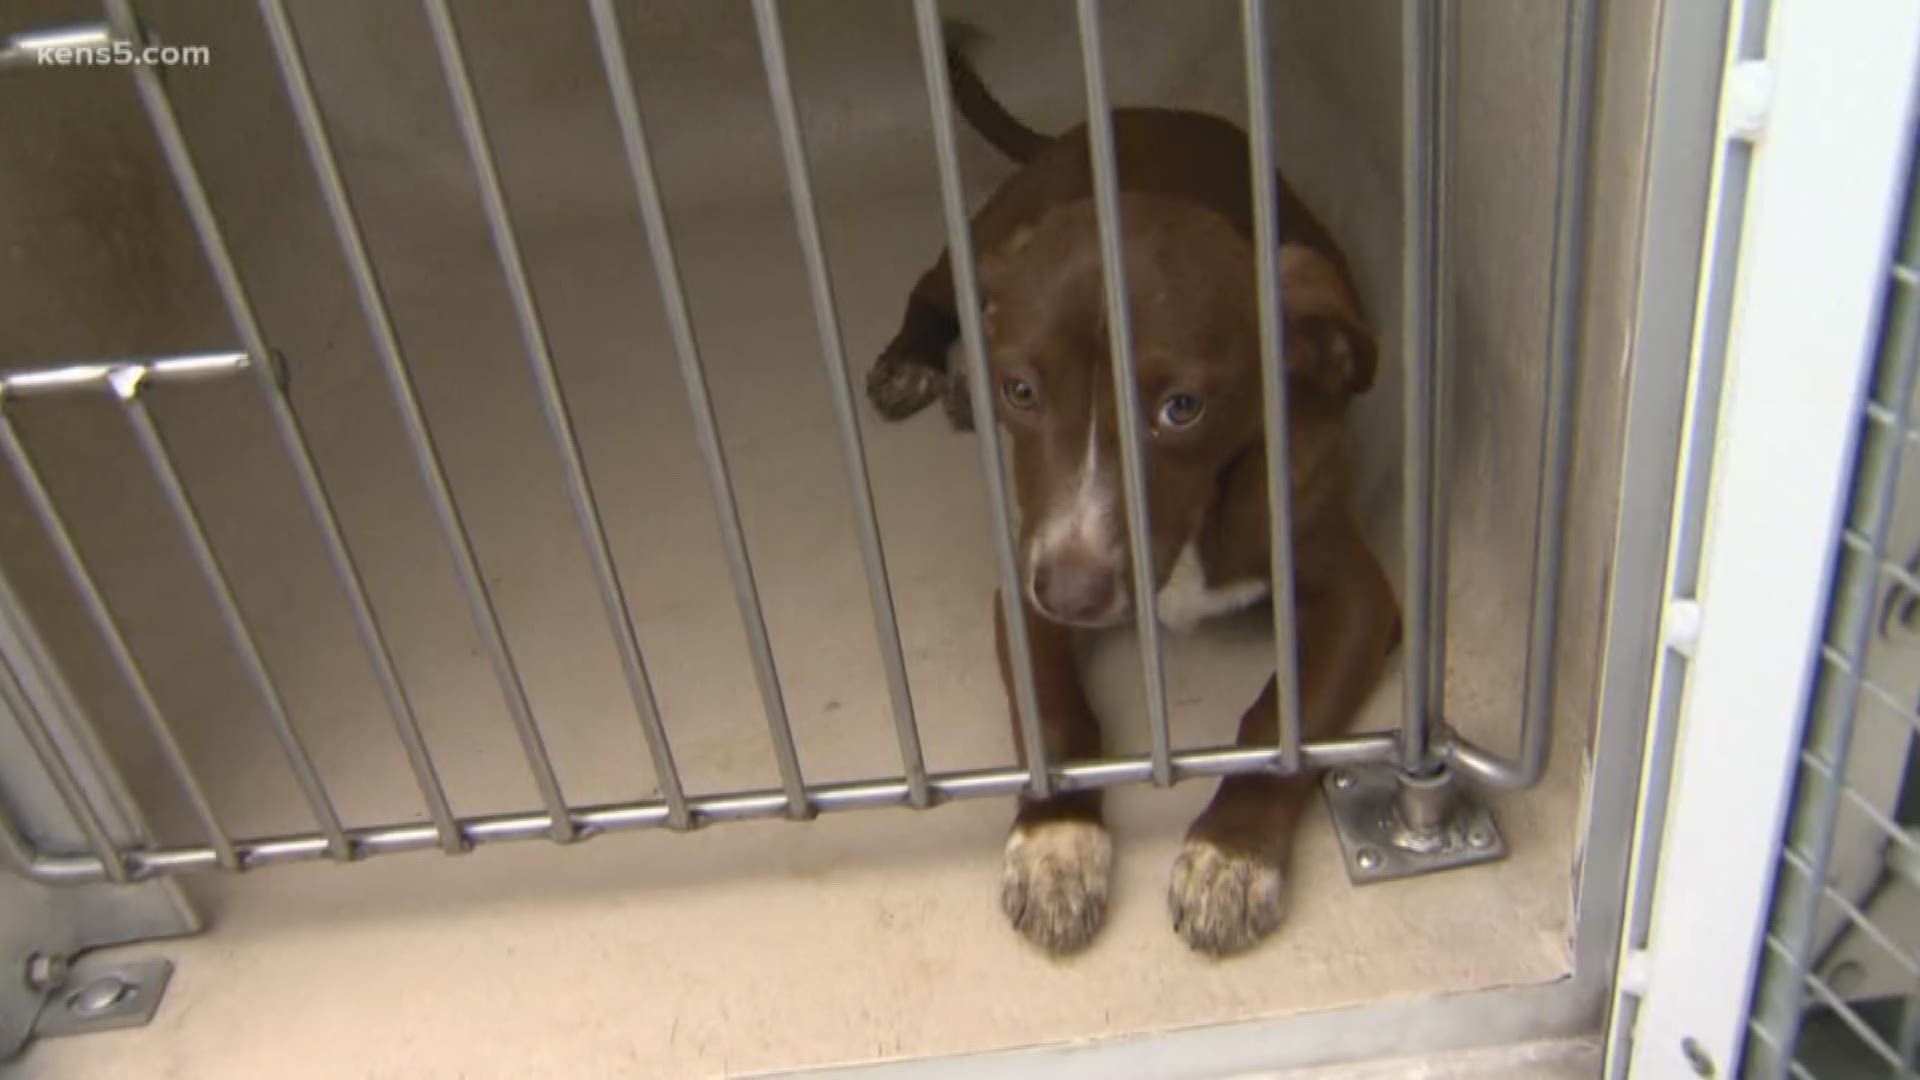 Two big animal rescues in one day. The same day officers rescued 23 dogs in 'deplorable condition' on the northeast side, a dozen more dogs were surrendered from a home on Dullye, southwest of downtown. Eyewitness News reporter Sharon Ko joins us live at the San Antonio Humane Society with details.